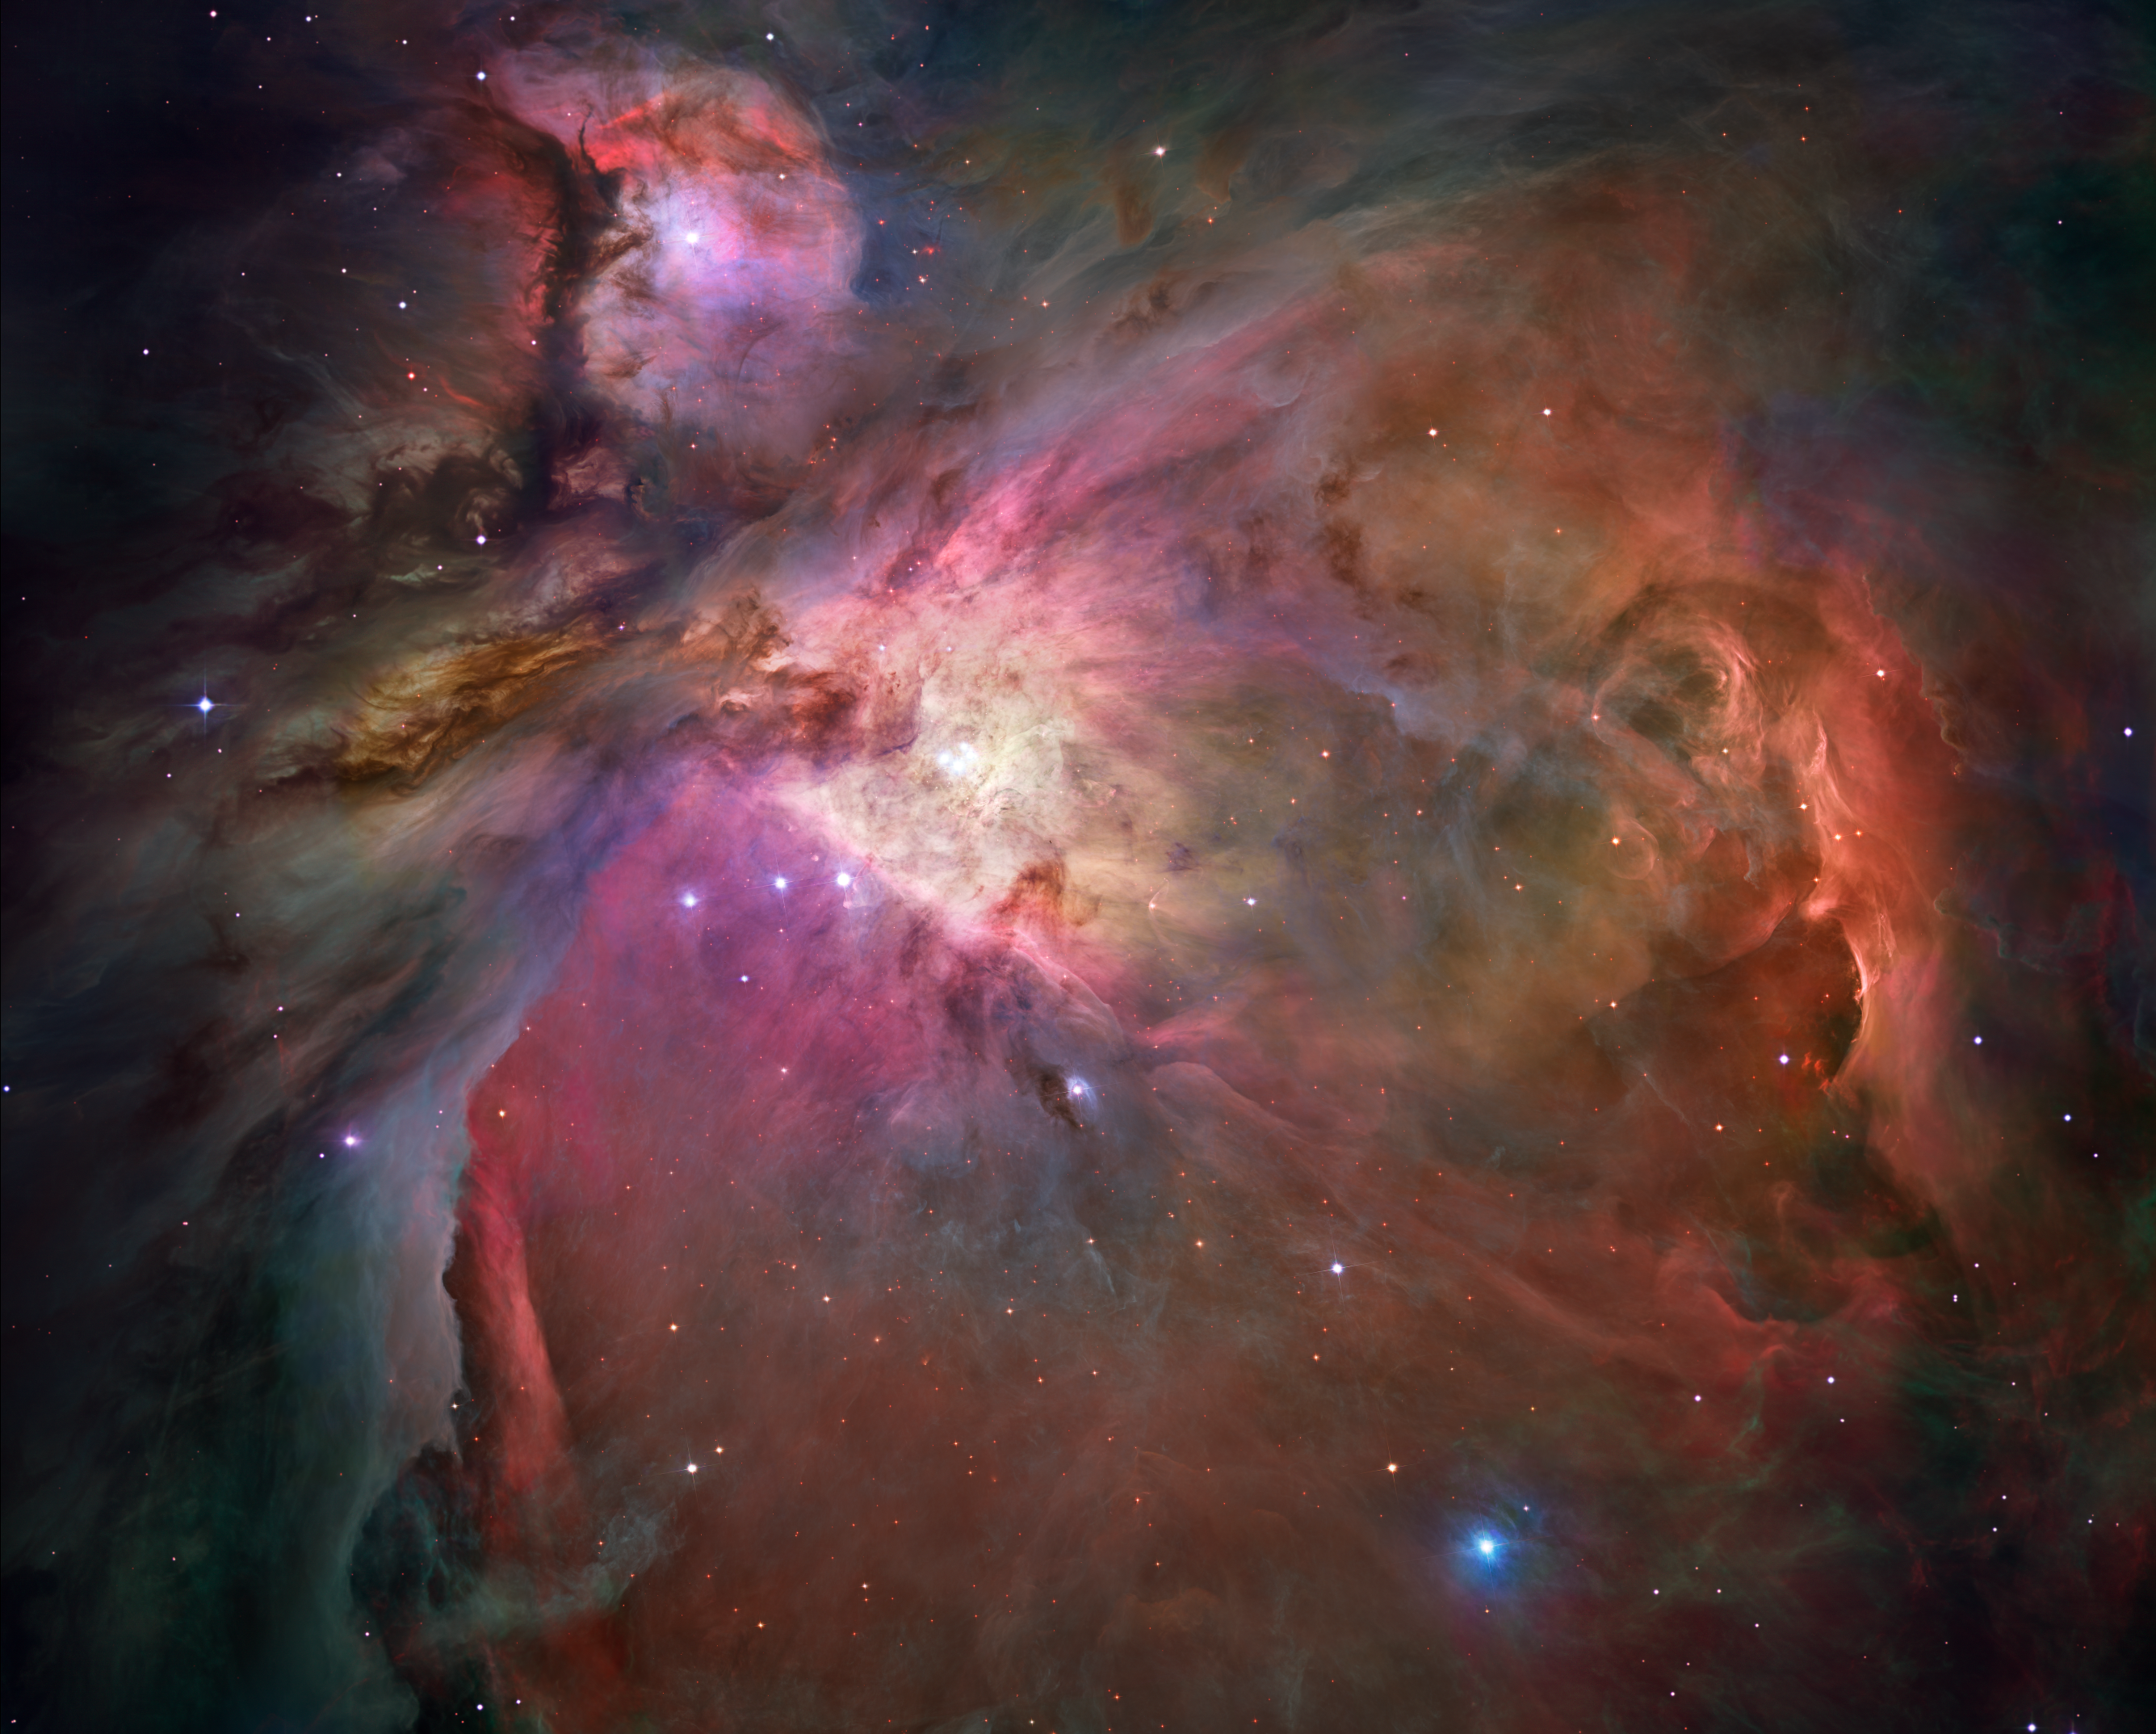 This Hubble image of the Orion Nebula offers a peek inside a cavern of roiling dust and gas where thousands of stars are forming. The image is dominated by wispy clouds in shades of red, yellow and orange against a dark background and dotted with stars. There are two concentrations of clouds, one in the shape of an anatomical heart anchored at the center of the image and tilted so that it fills the right side and lower left. In the upper left, separated from the heart shape with a dark lane is a knot of reds and pinks. 